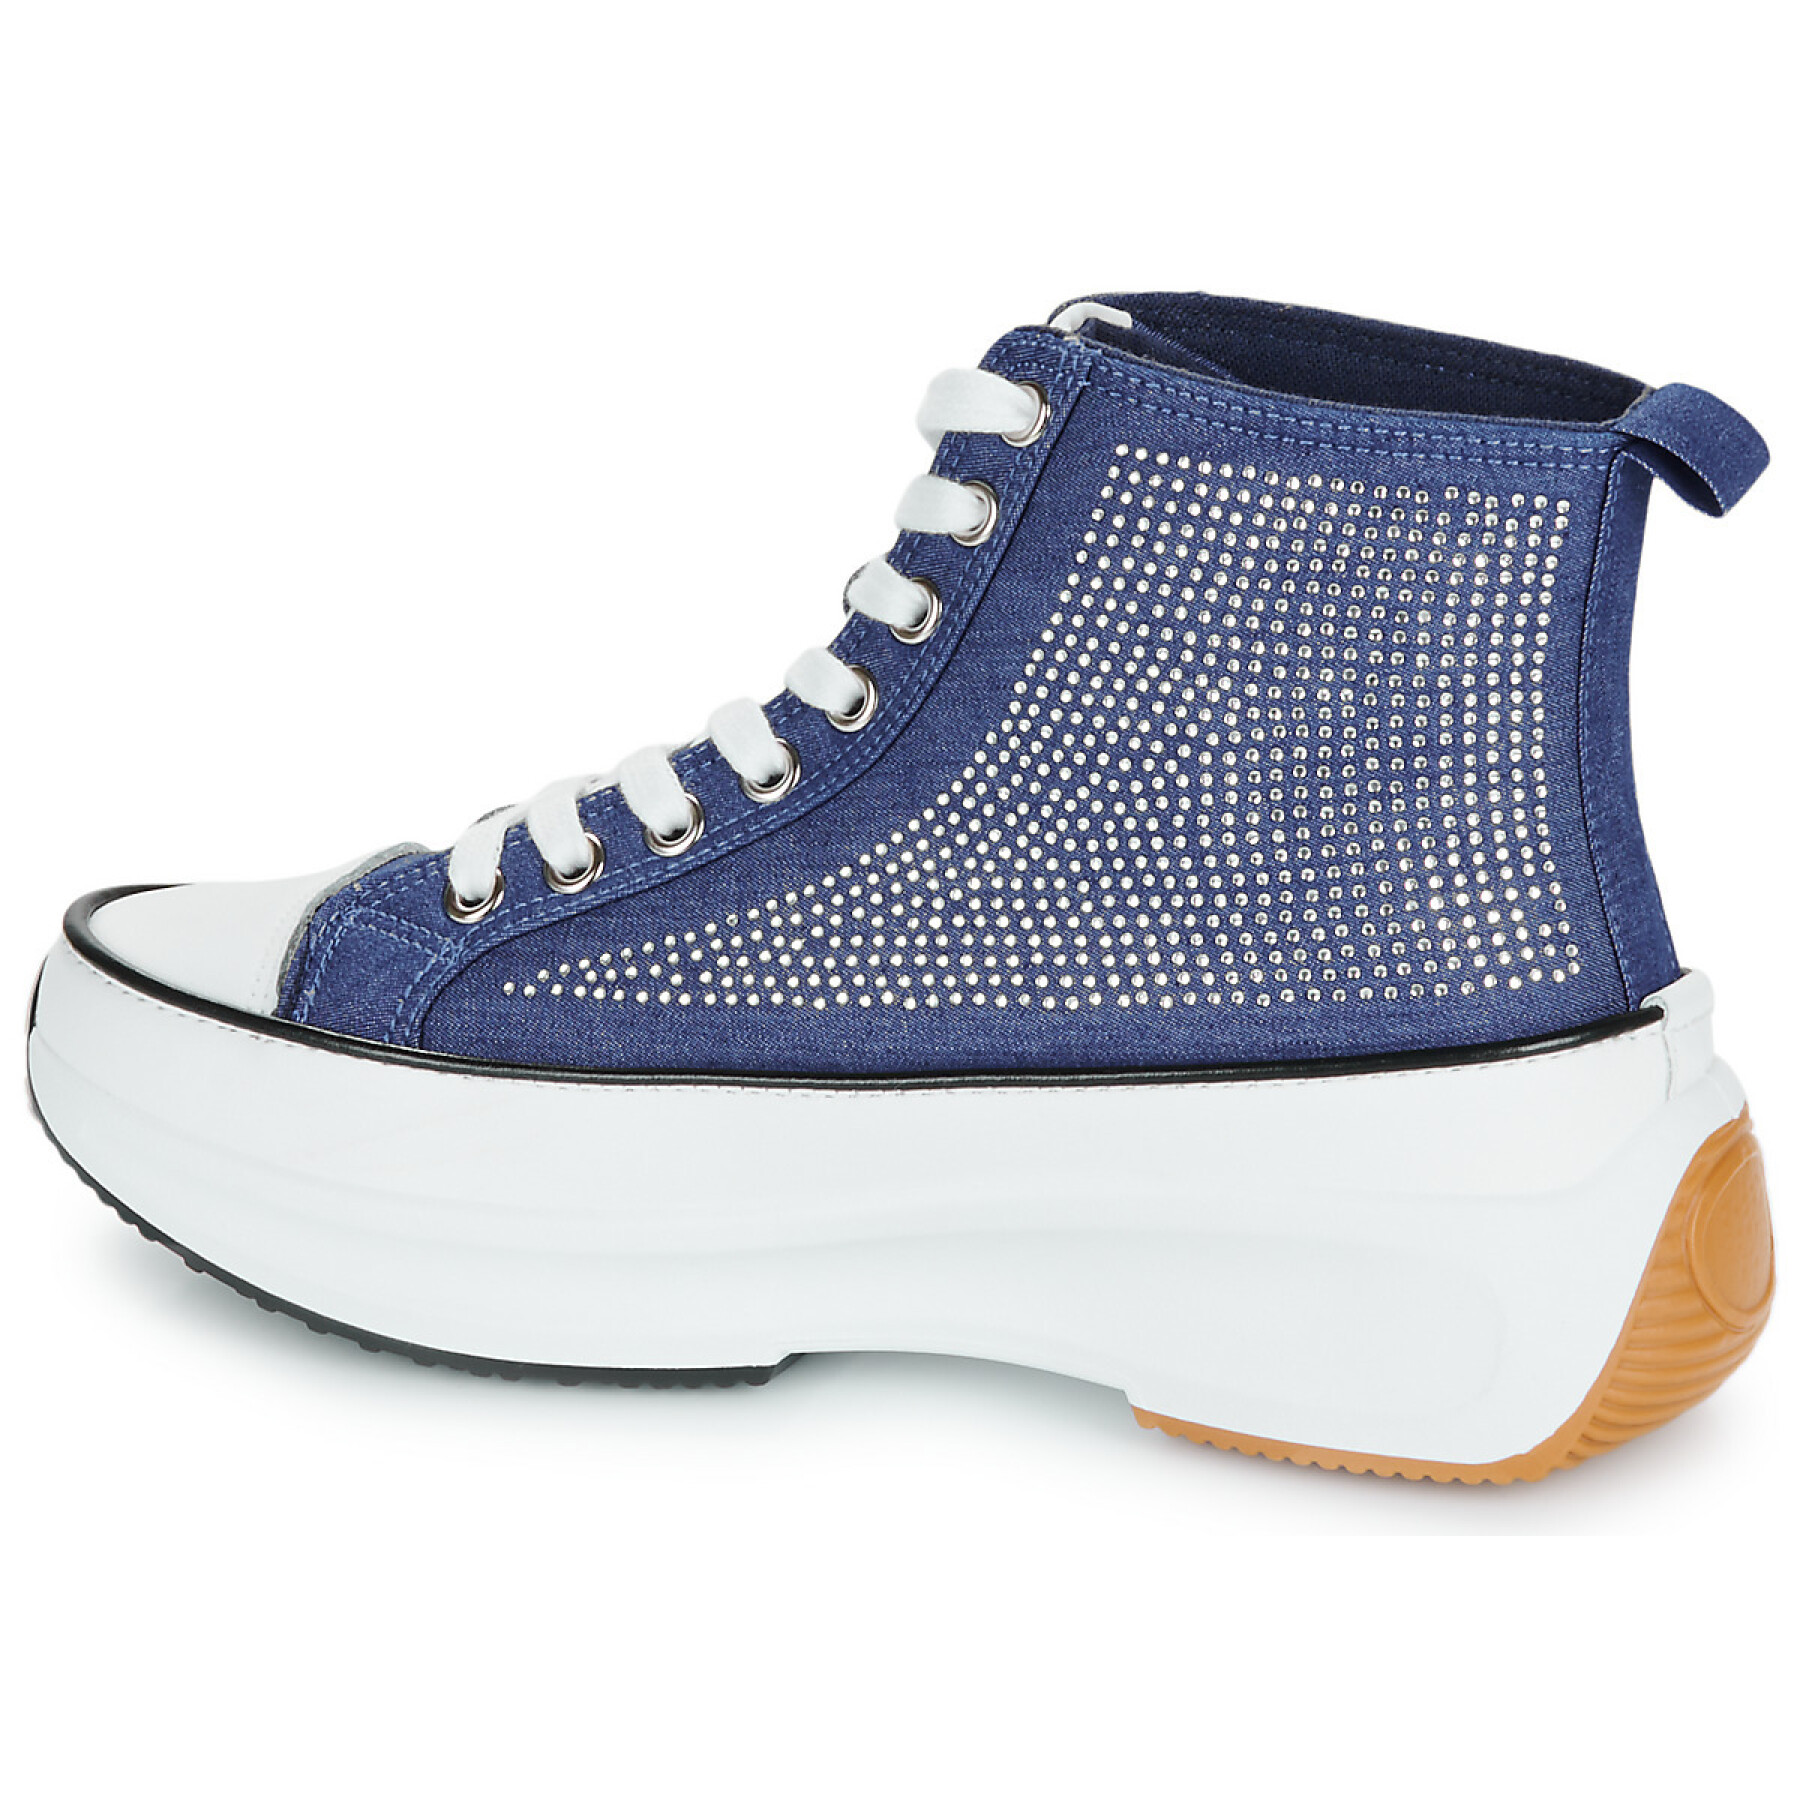 Women's casual sneakers Kaporal Christa